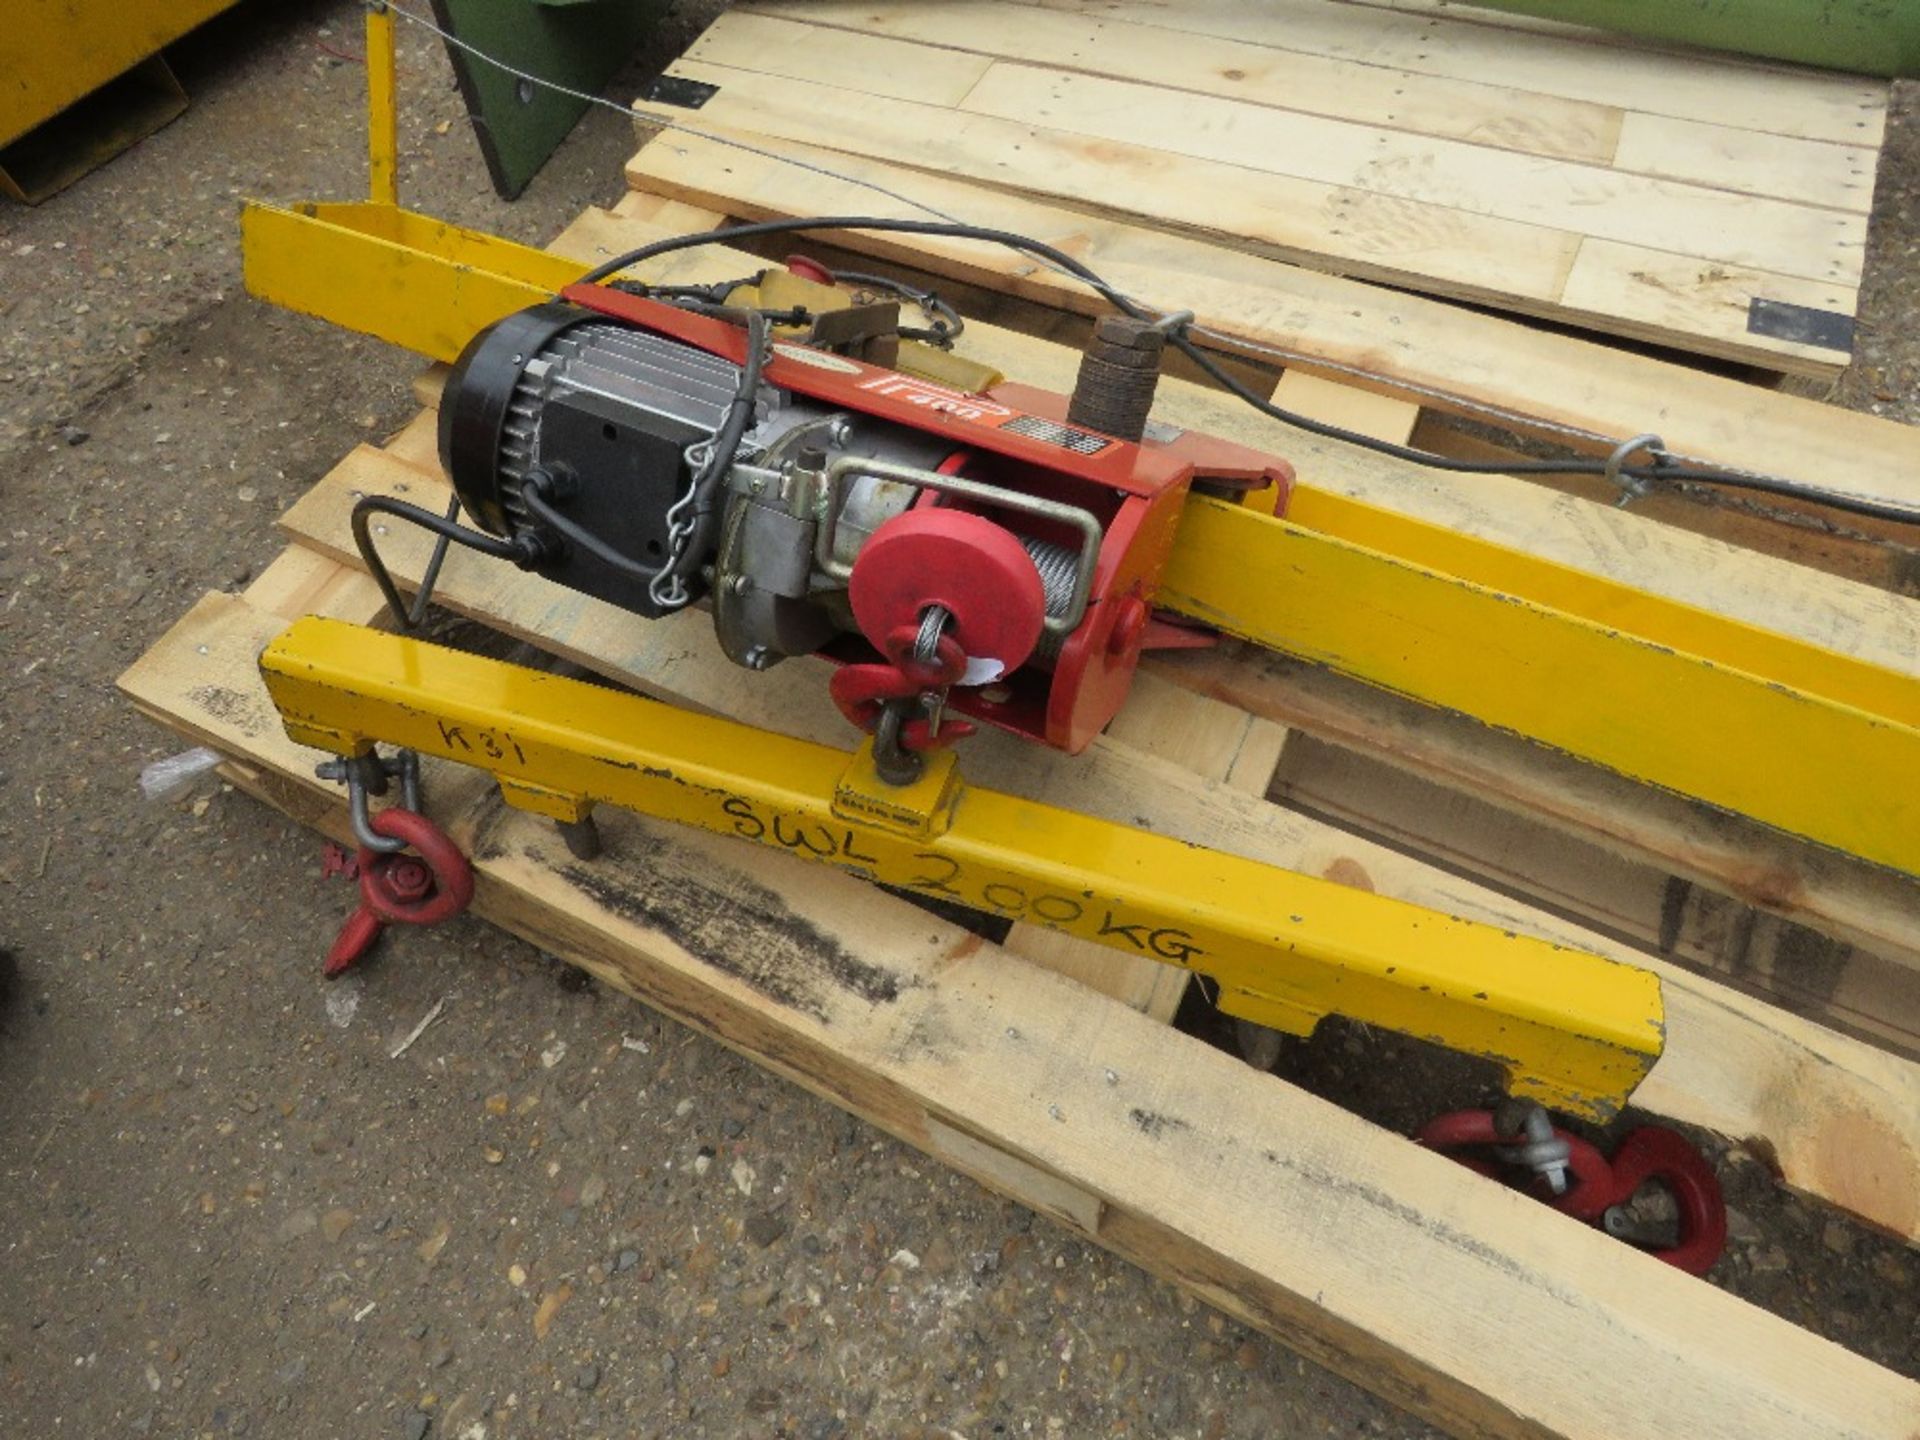 JIB CRANE UNIT WITH SMALL SPREADER BAR, MAIN POST, BEAM AND CONNECTING PIN. 400KG RATED HOIST, 240 V - Image 5 of 7